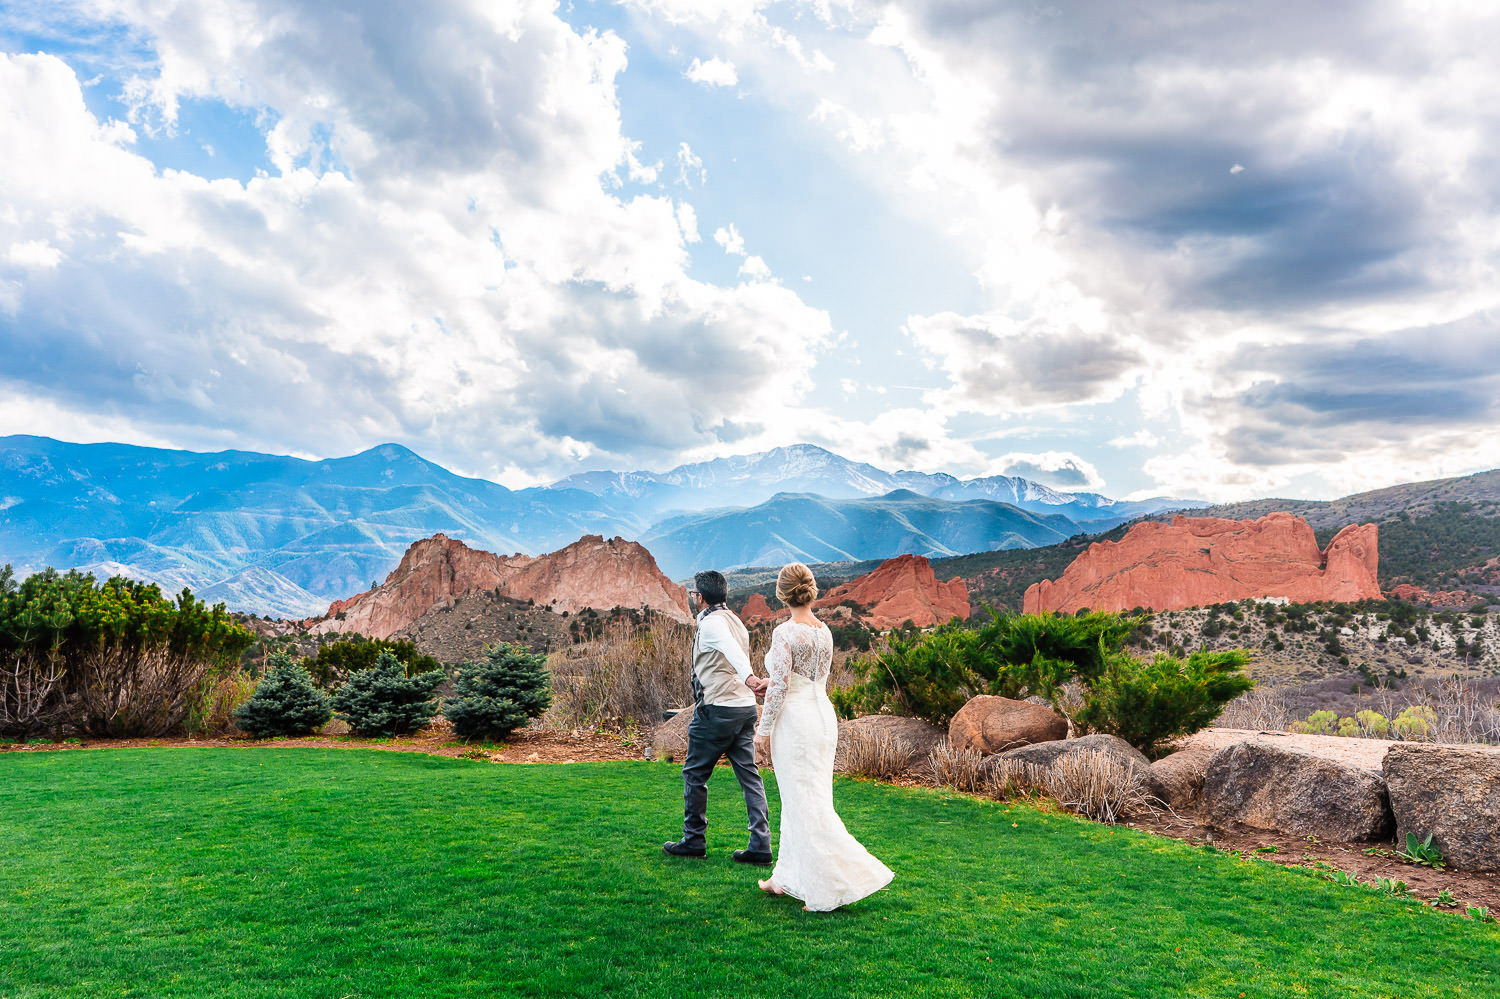 Newlyweds in wedding attire hold hands and walk along a grassy area in Garden of the Gods resort with distant views of the Garden of the Gods park and the Rocky Mountains.